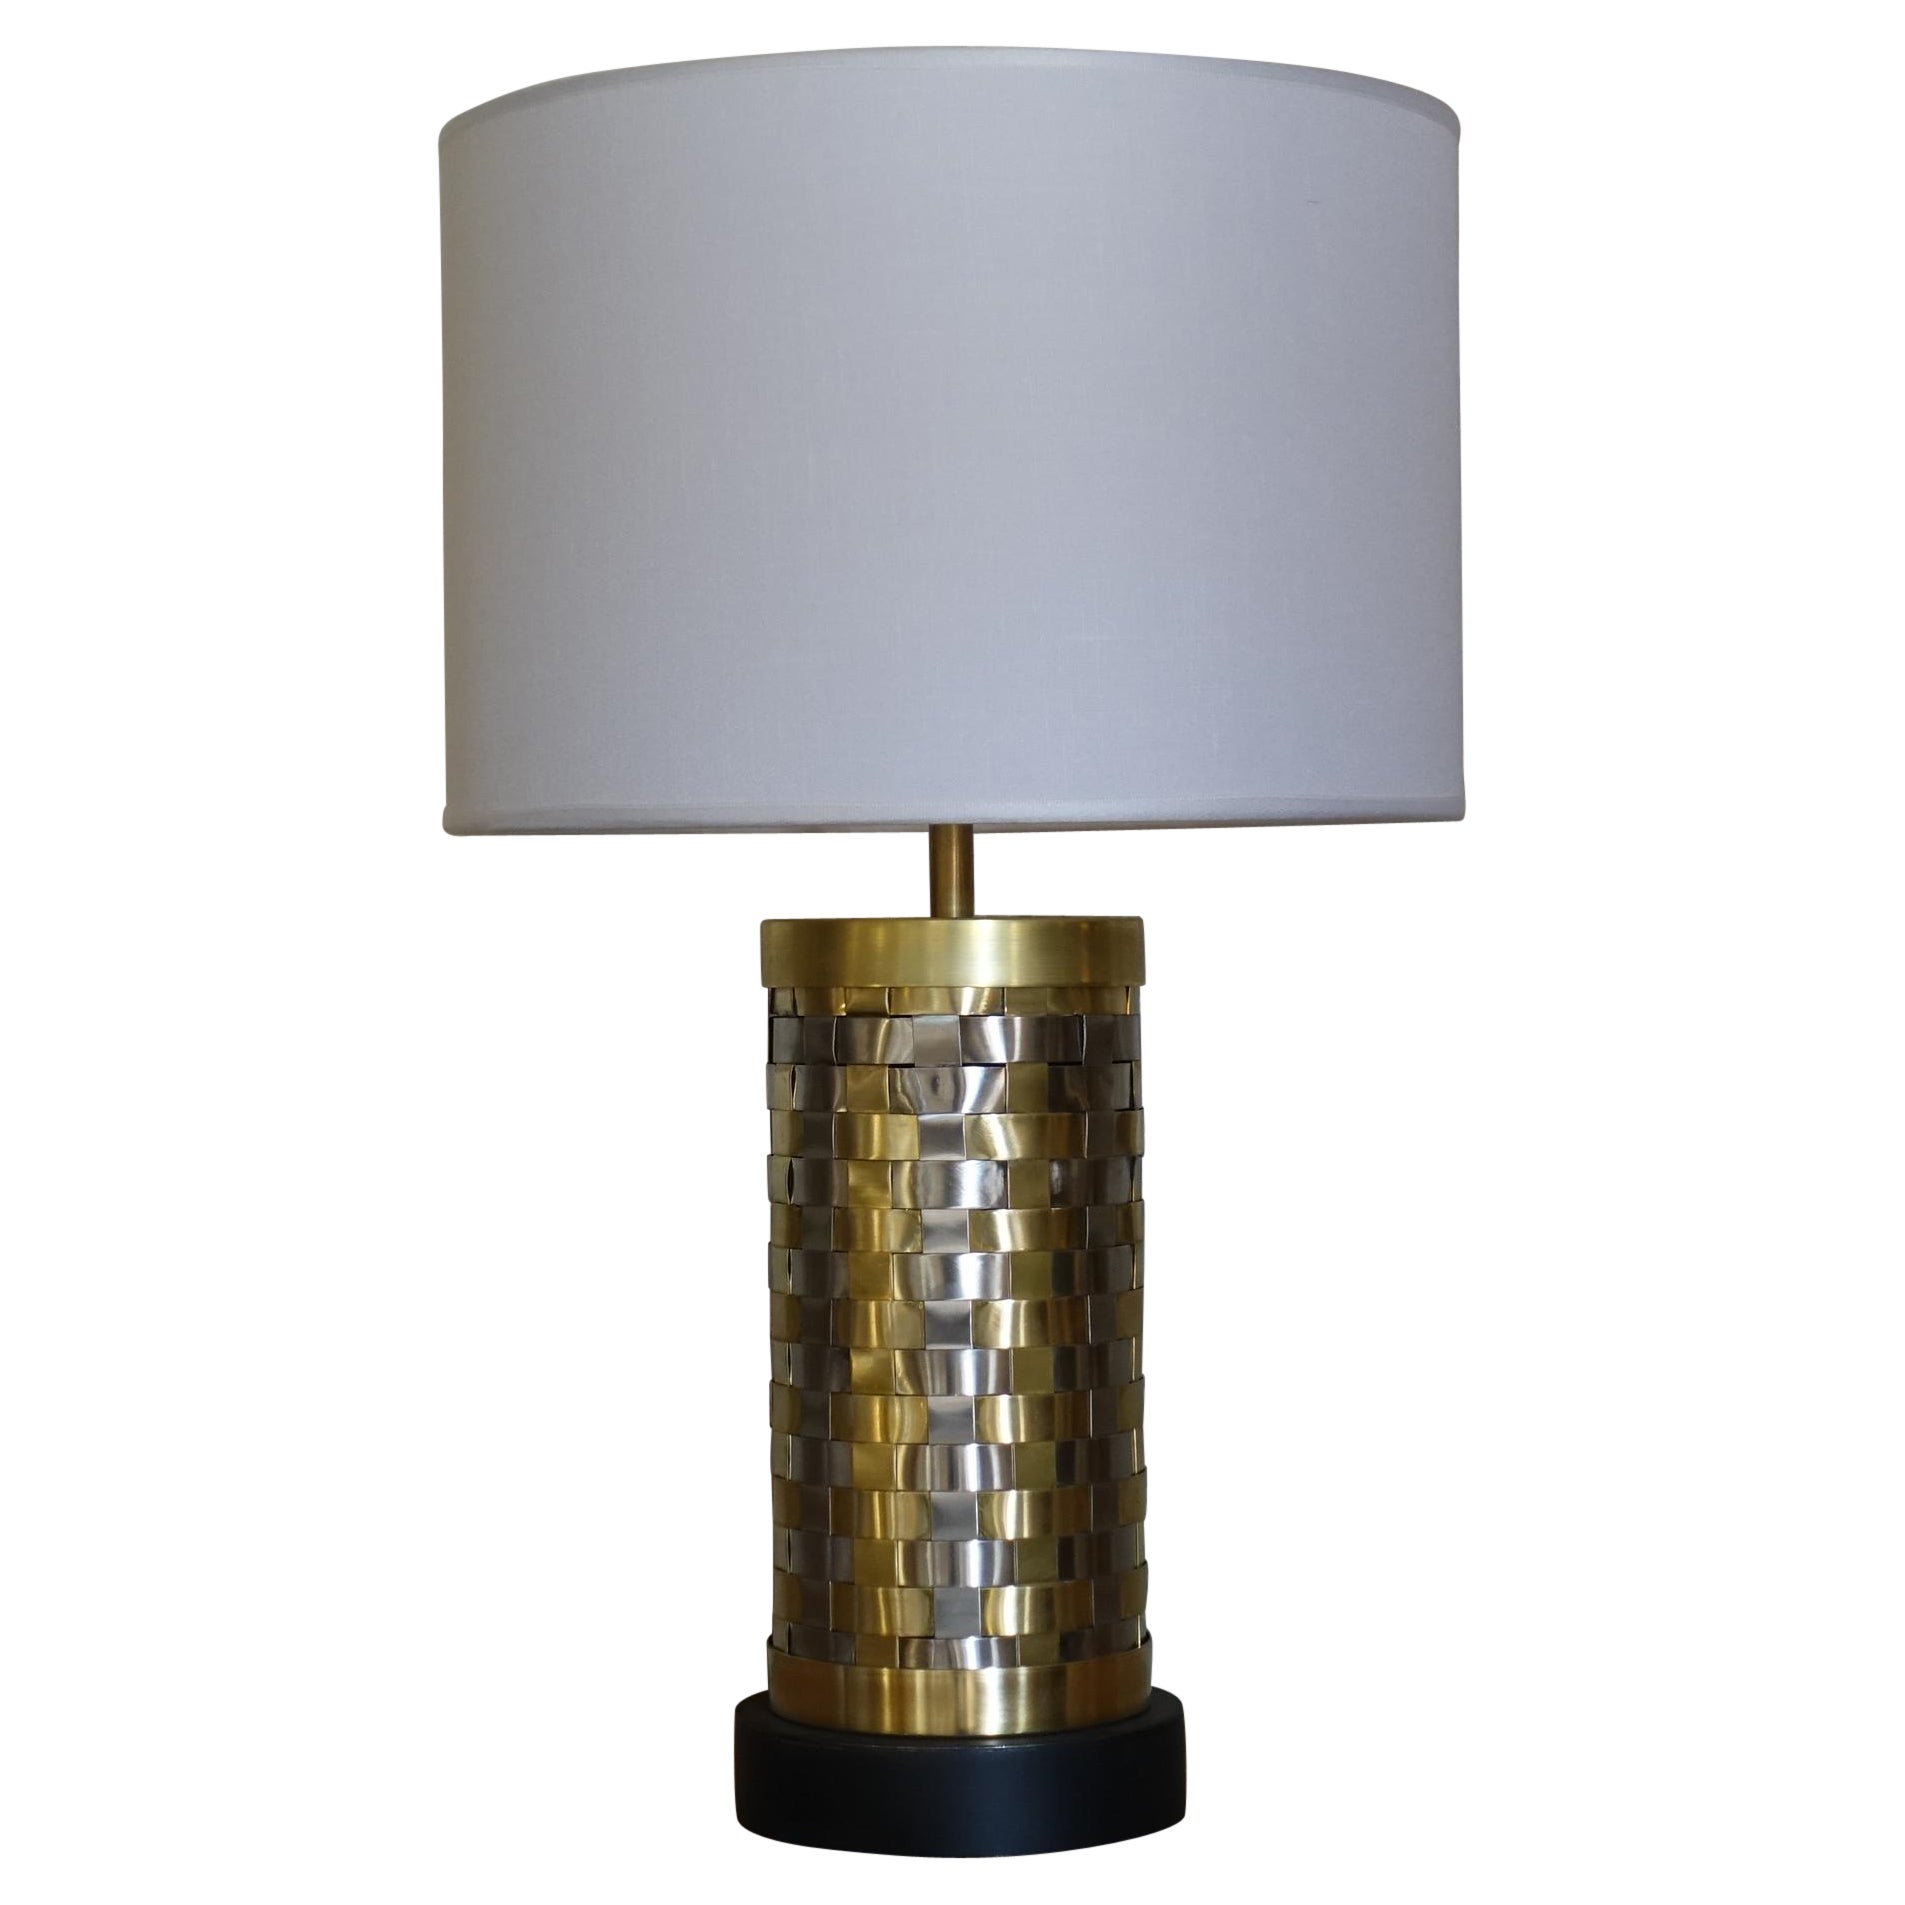 Flair Edition "Intreccio" Table Lamp in Brass and Steel, Italy, 2021